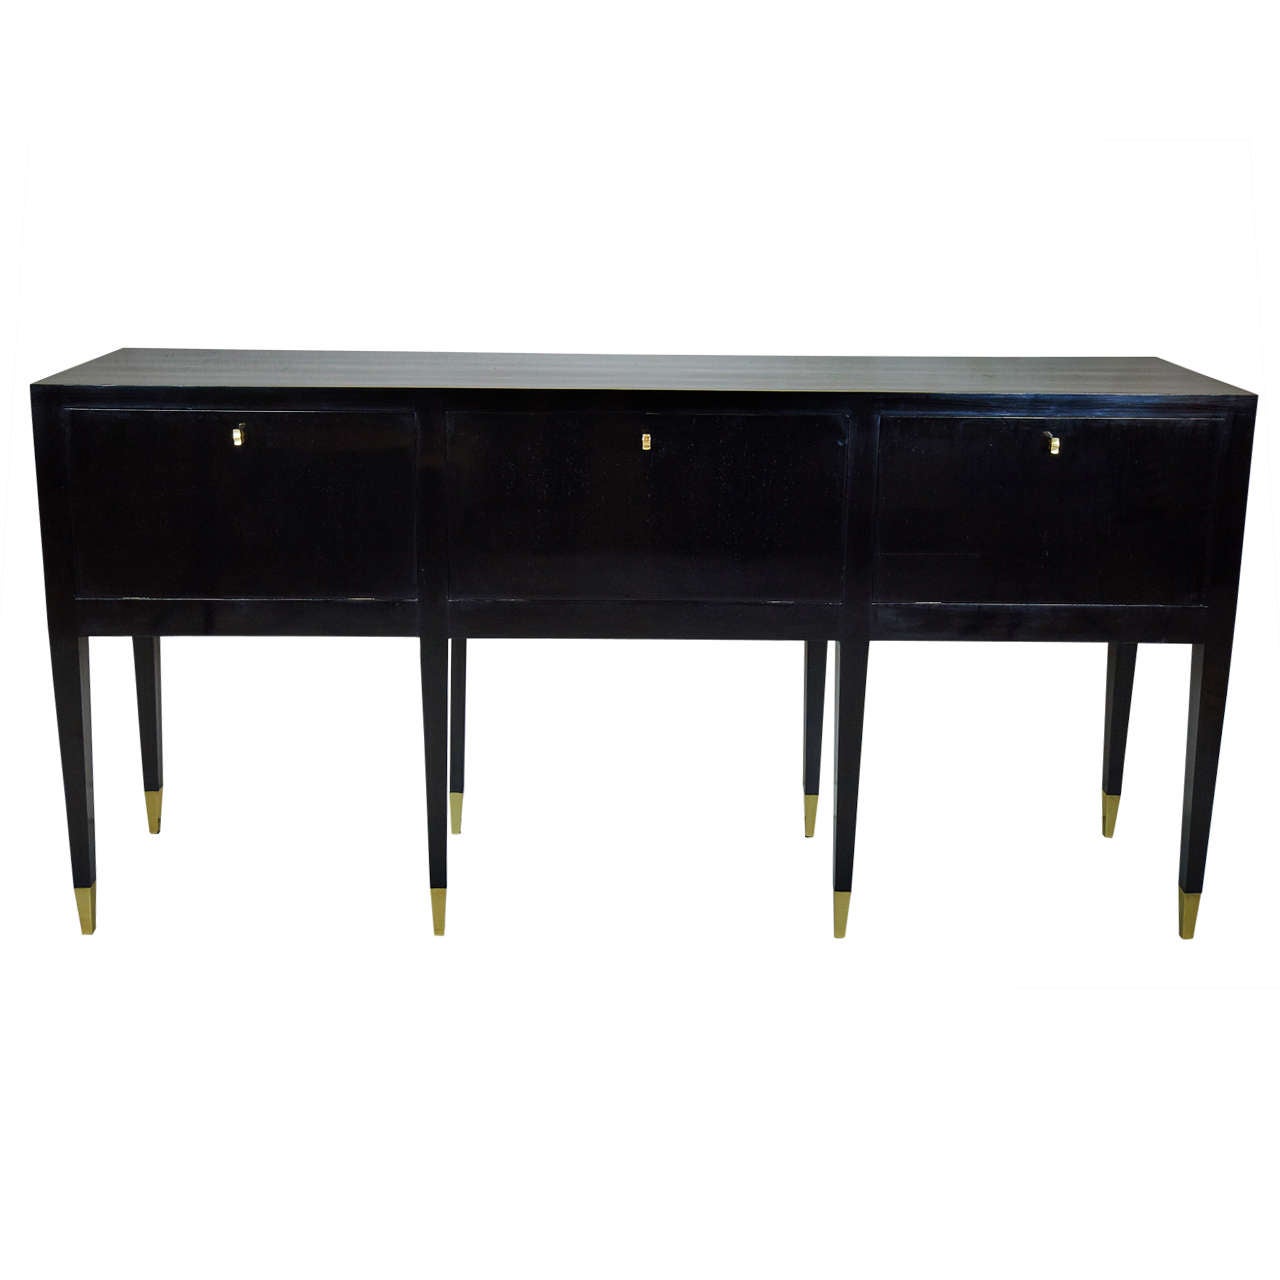 Elegant, Exceptional, Slender Italian Sideboard or Console, 1940s by Quarti